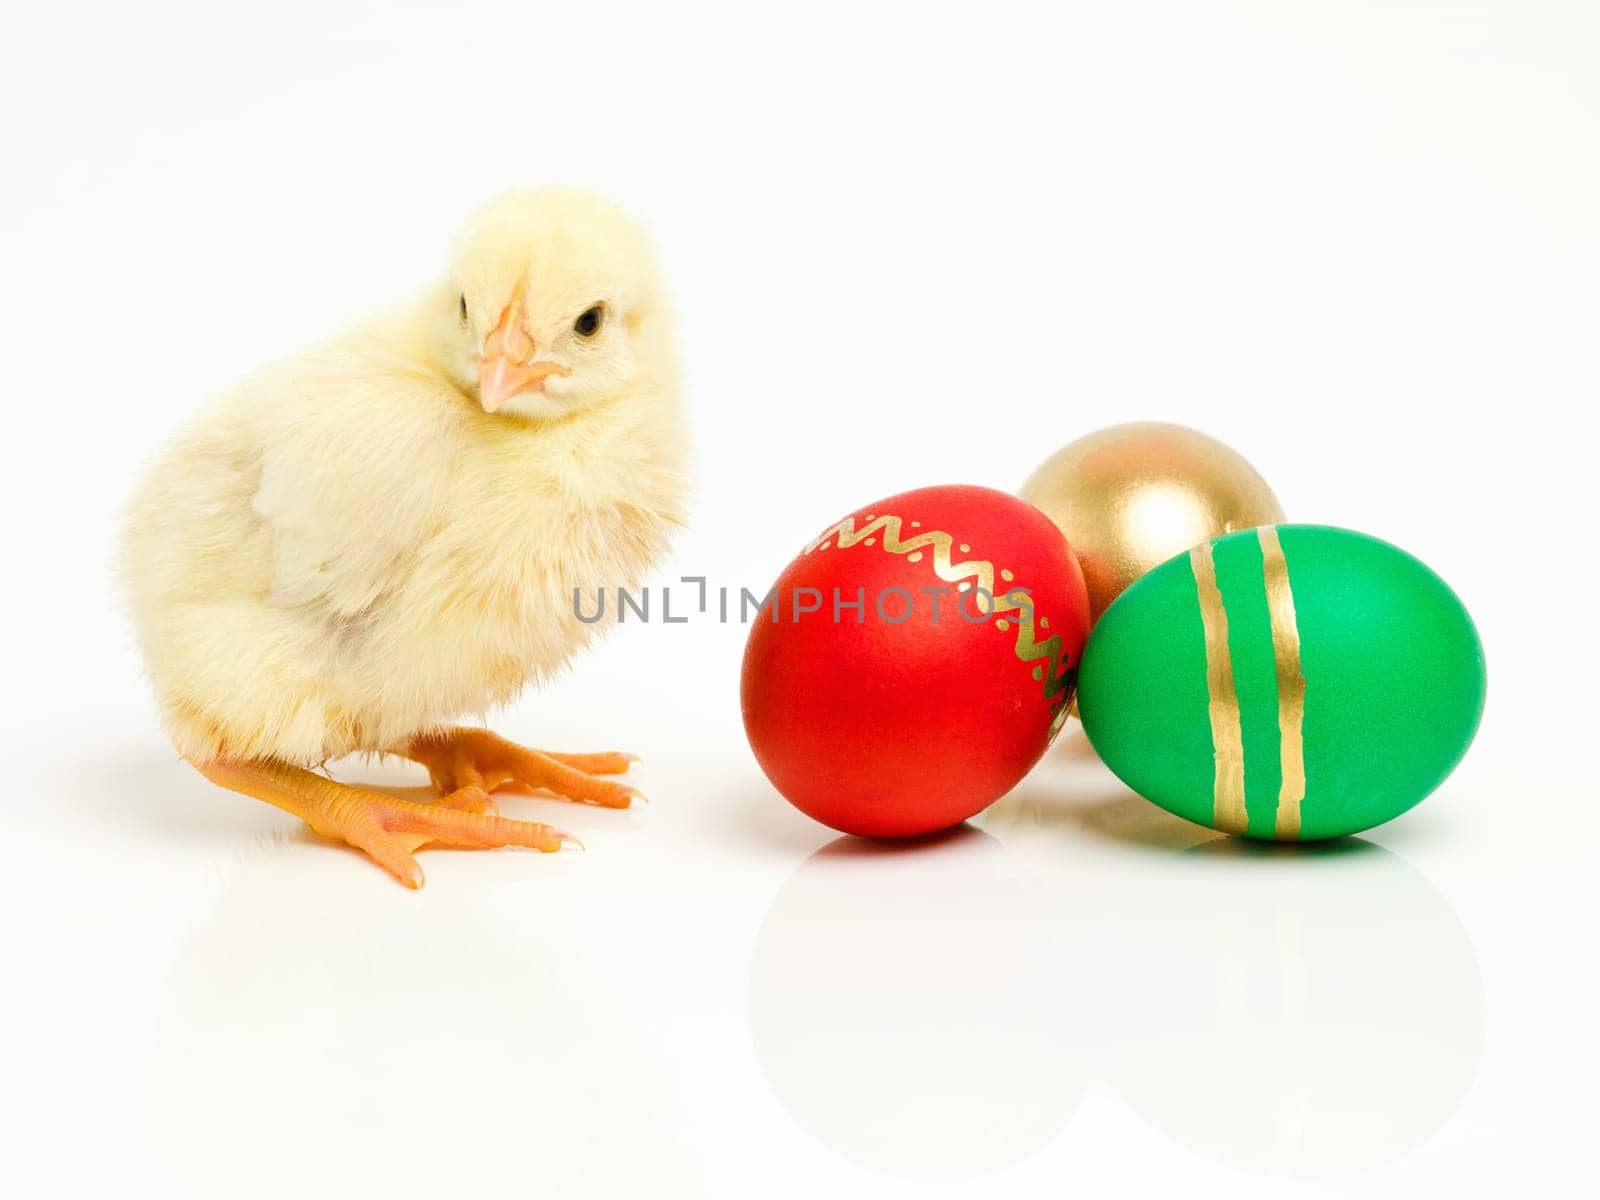 Chick, easter and chocolate eggs or sweets dessert on holiday for festive celebration, shell or traditional. Animal, young and unhealthy snack in studio white background for vacation, season or candy.